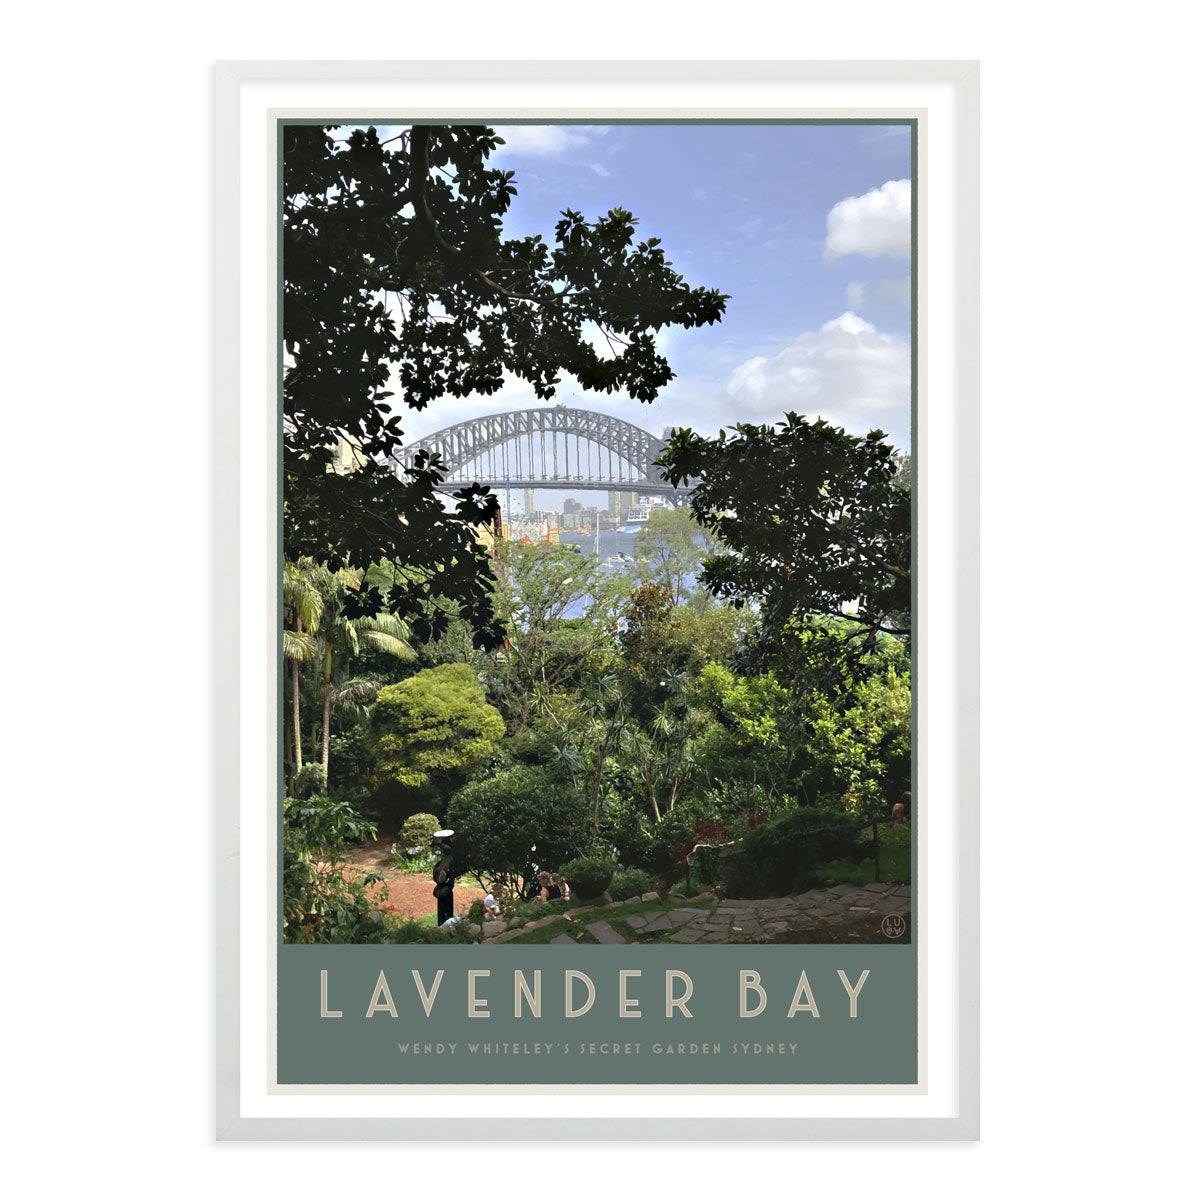 Lavender Bay vintage style travel print by places we luv